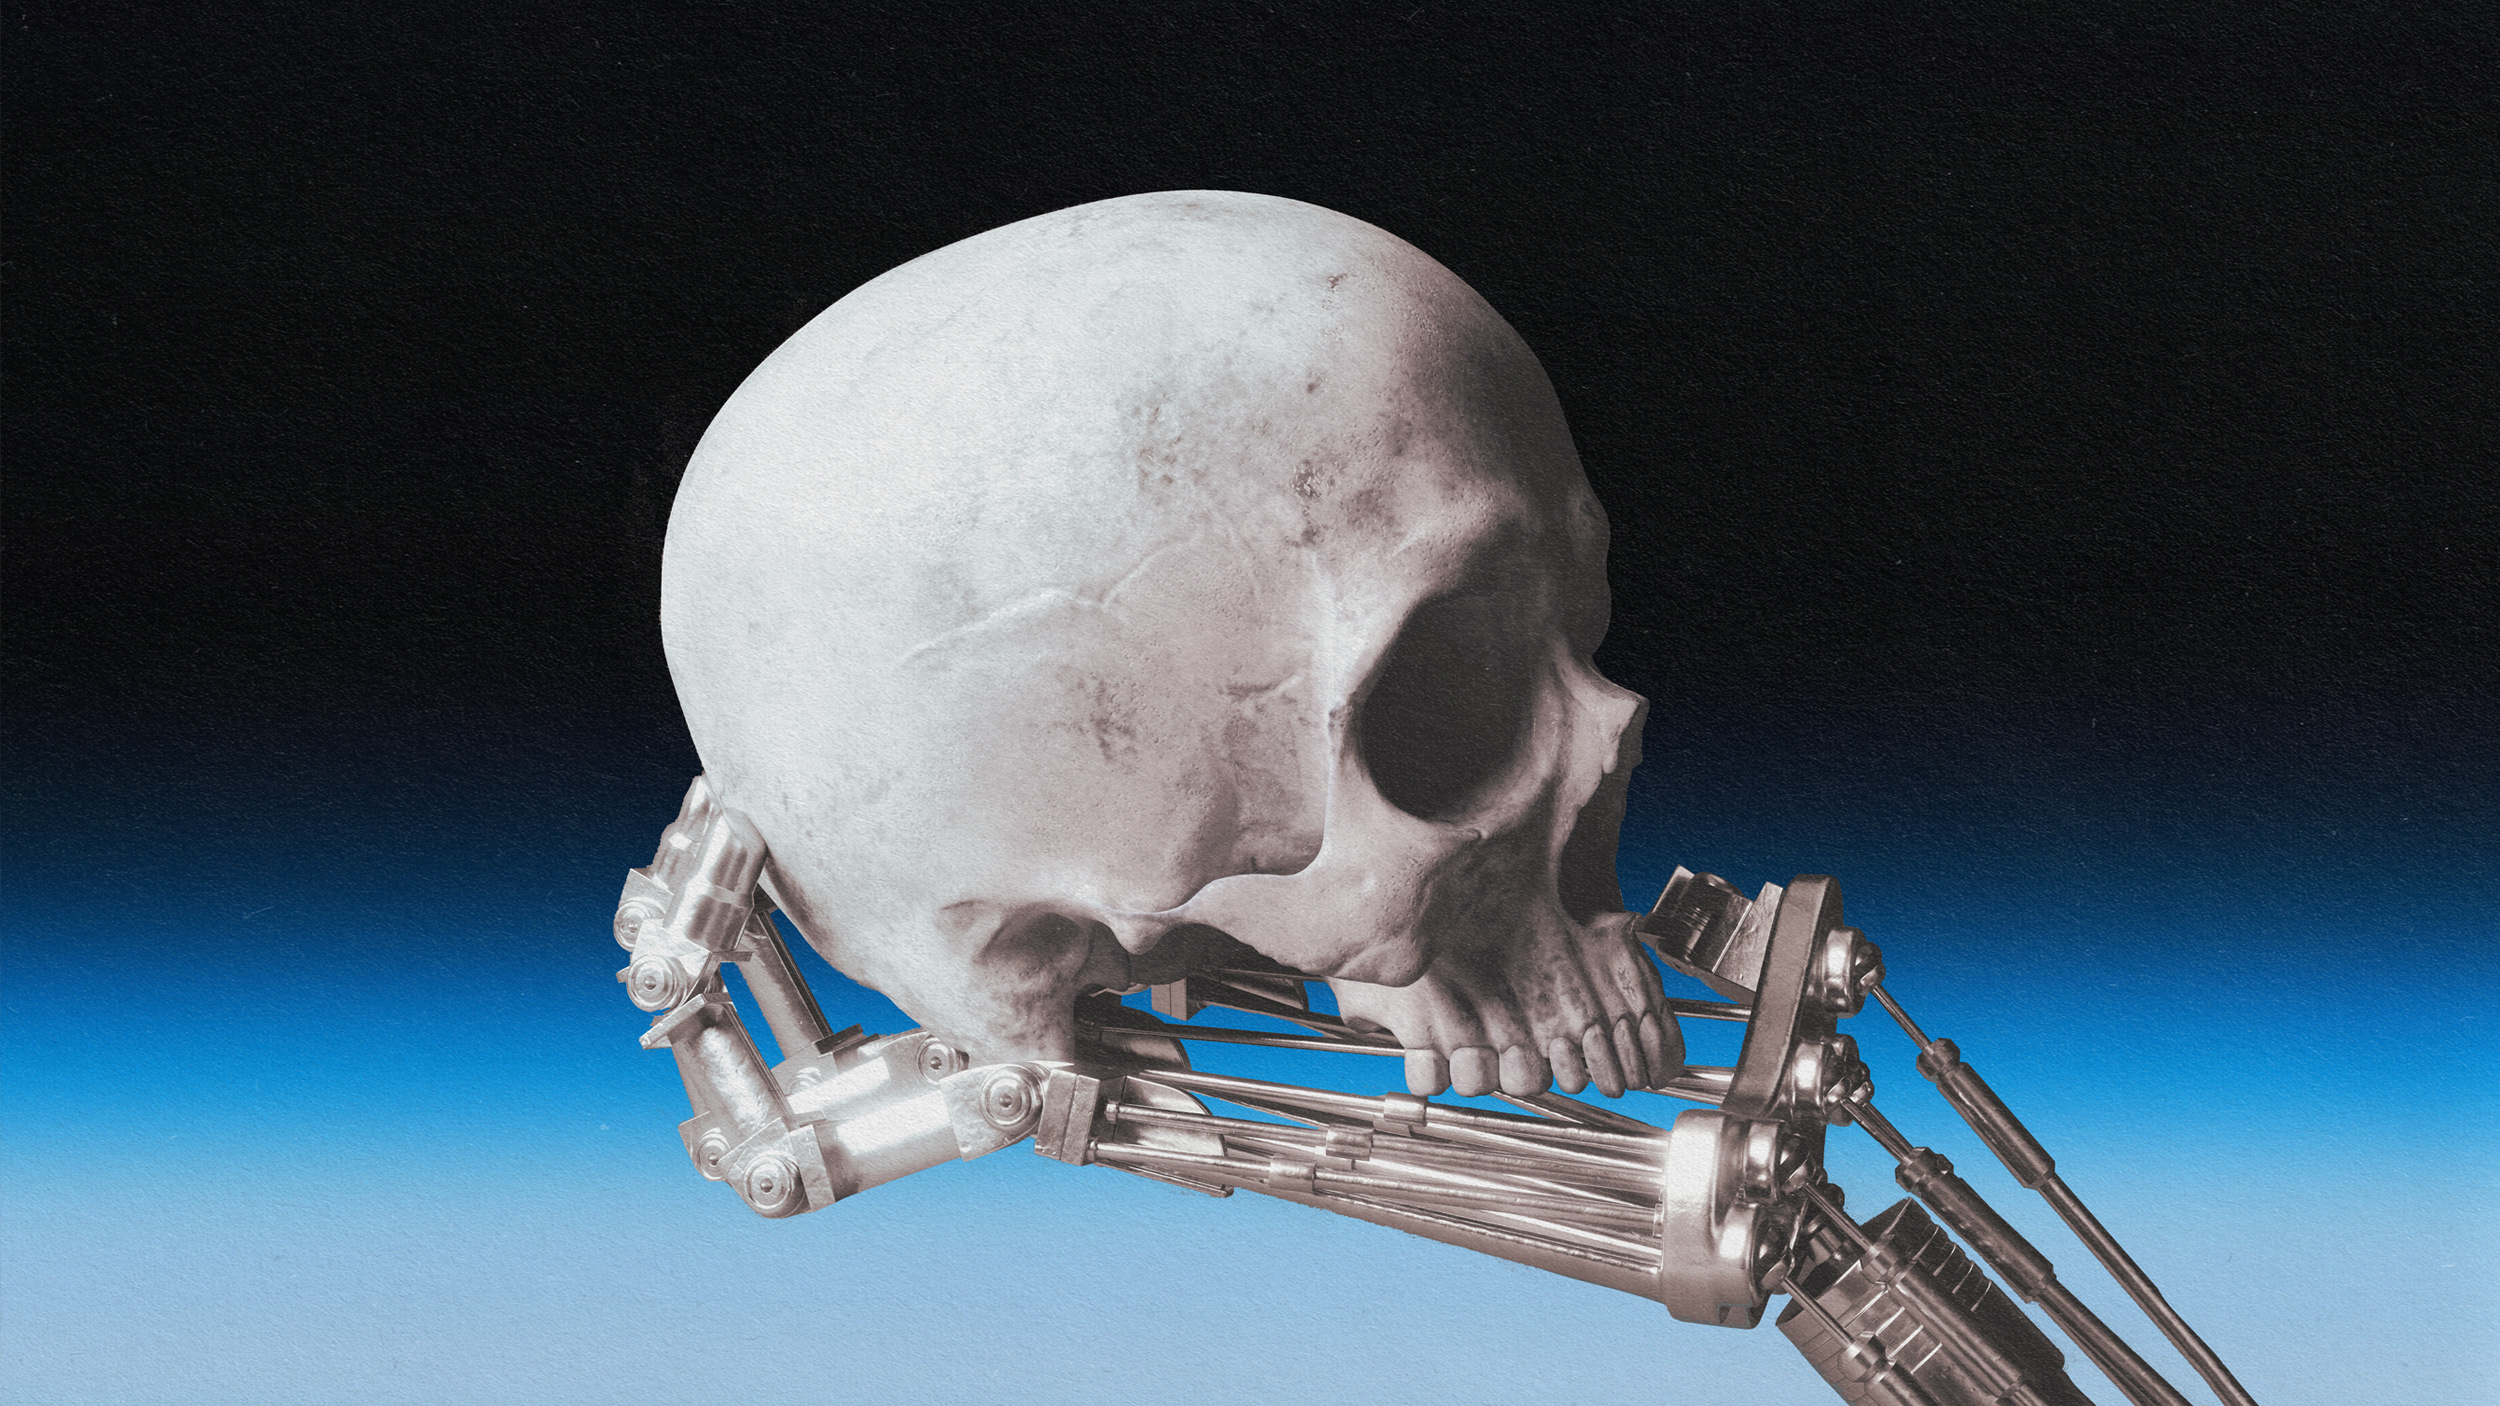 An image of a skull with an AI robot attached to it, symbolizing the threat of human extinction.